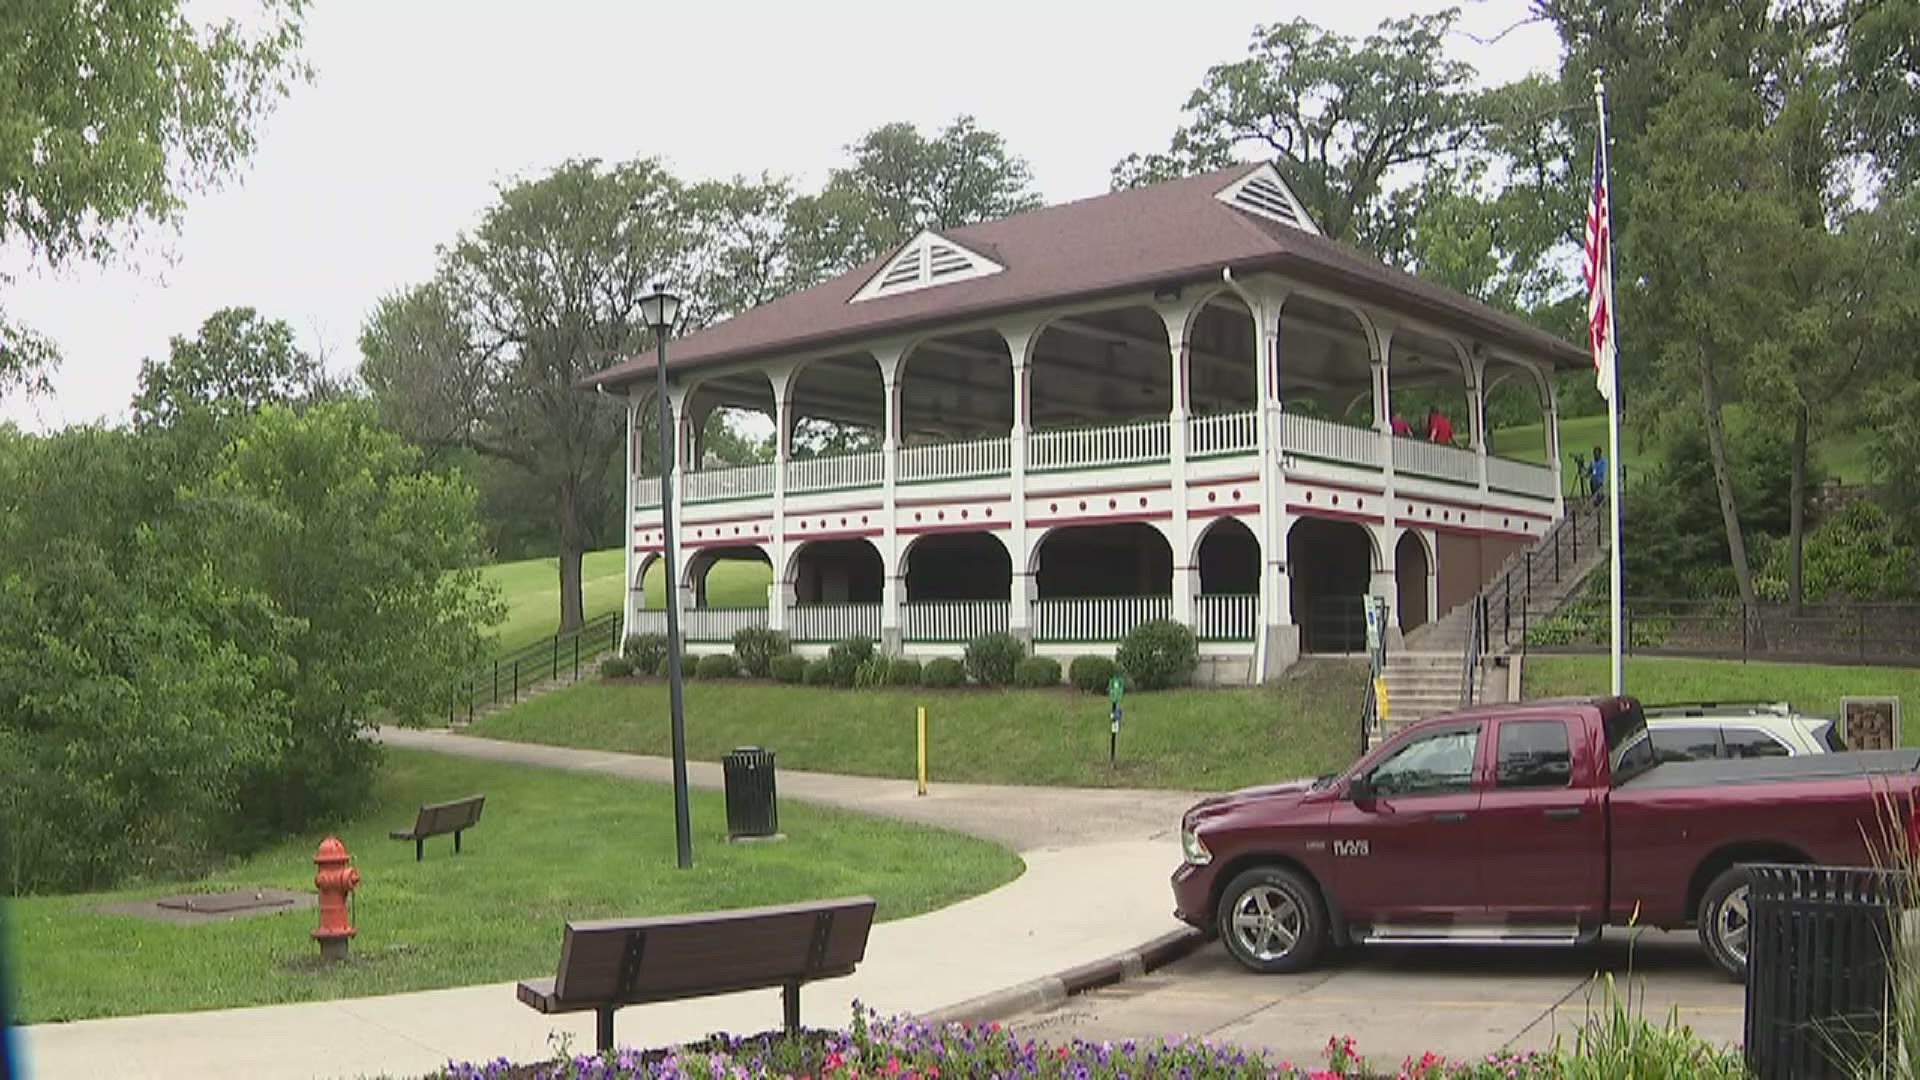 Designated as a historical landmark back in the January, the 130-year-old pavilion was honored in a ceremony Friday afternoon.